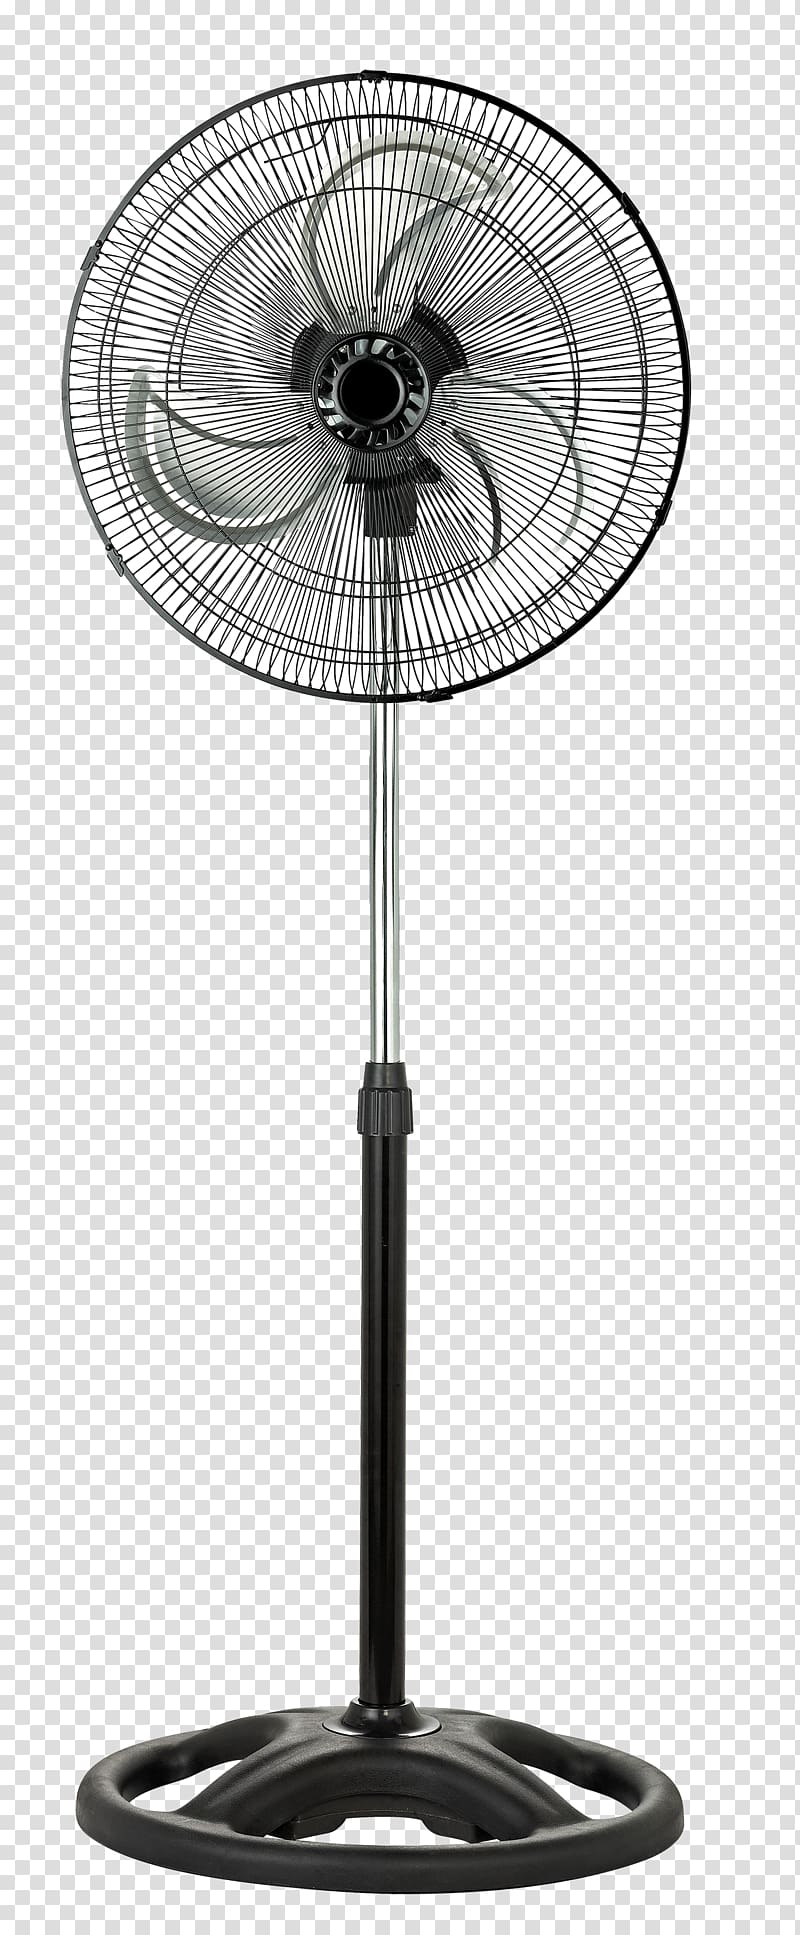 Window fan Ceiling Fans Table Home appliance, 12 Oscillating Table Fan transparent background PNG clipart